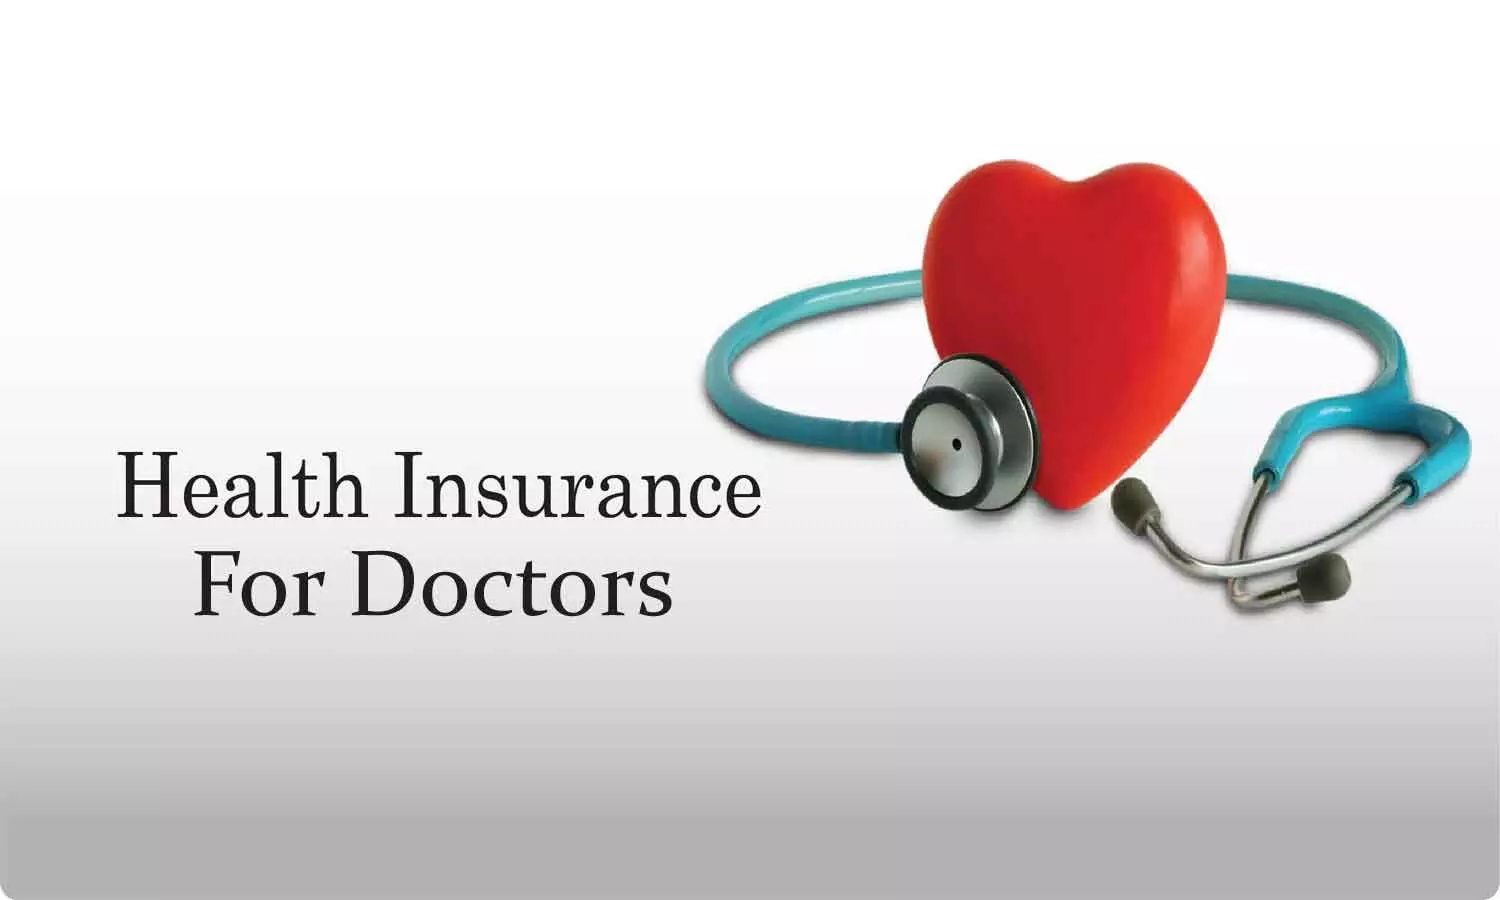 Rs 50 lakh Insurance for Health Workers Fighting COVID-19: Check out who is eligible